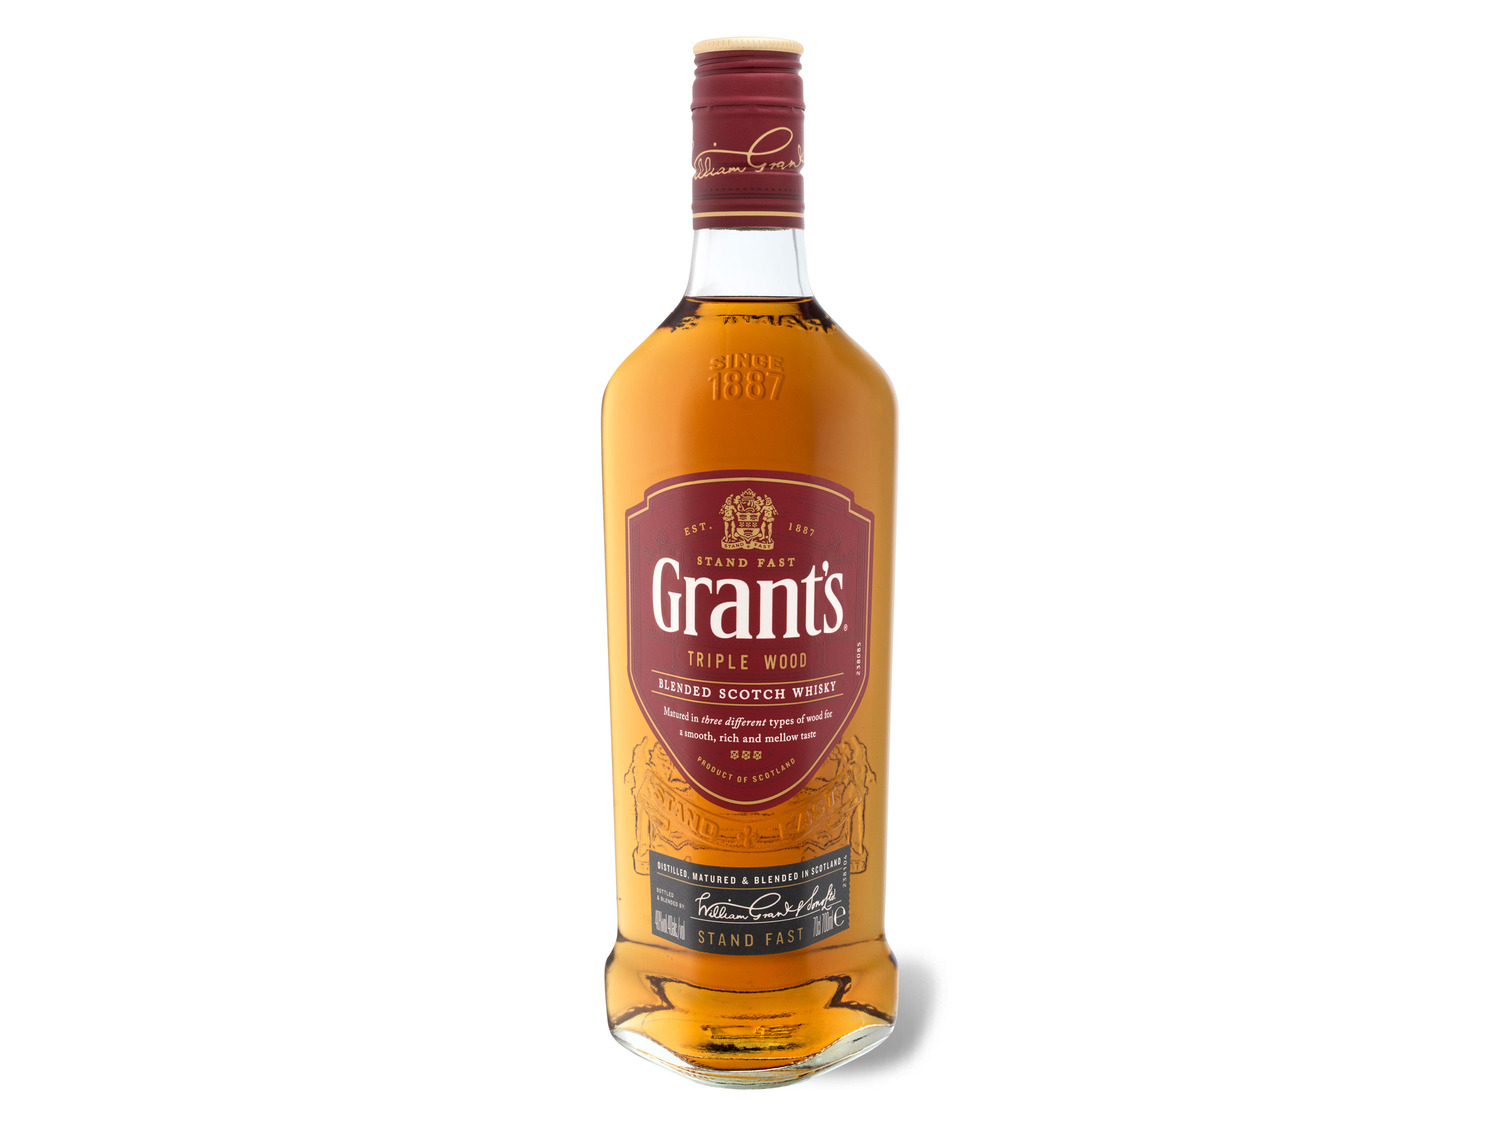 Grant\'s Triple Wood Blended Scotch Whisky 40% Vol